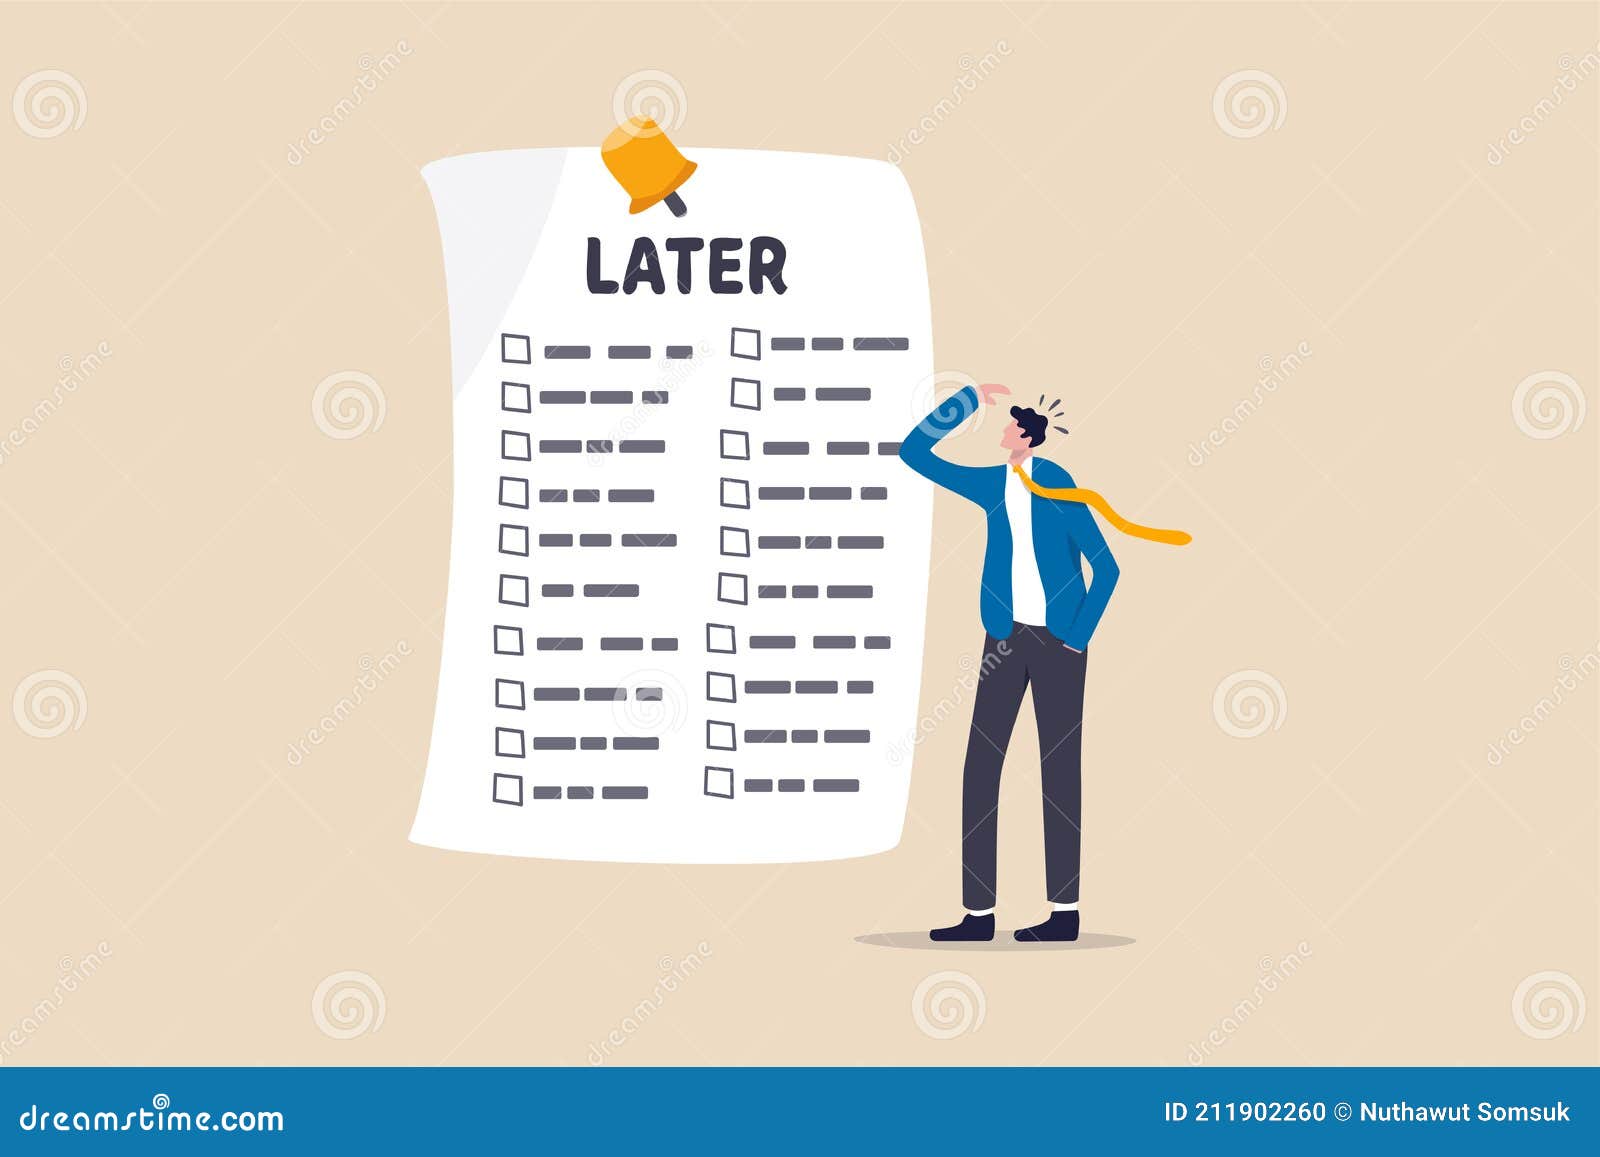 procrastination, do it later, laziness to postpone every work tasks to later check list concept, frustrated businessman office